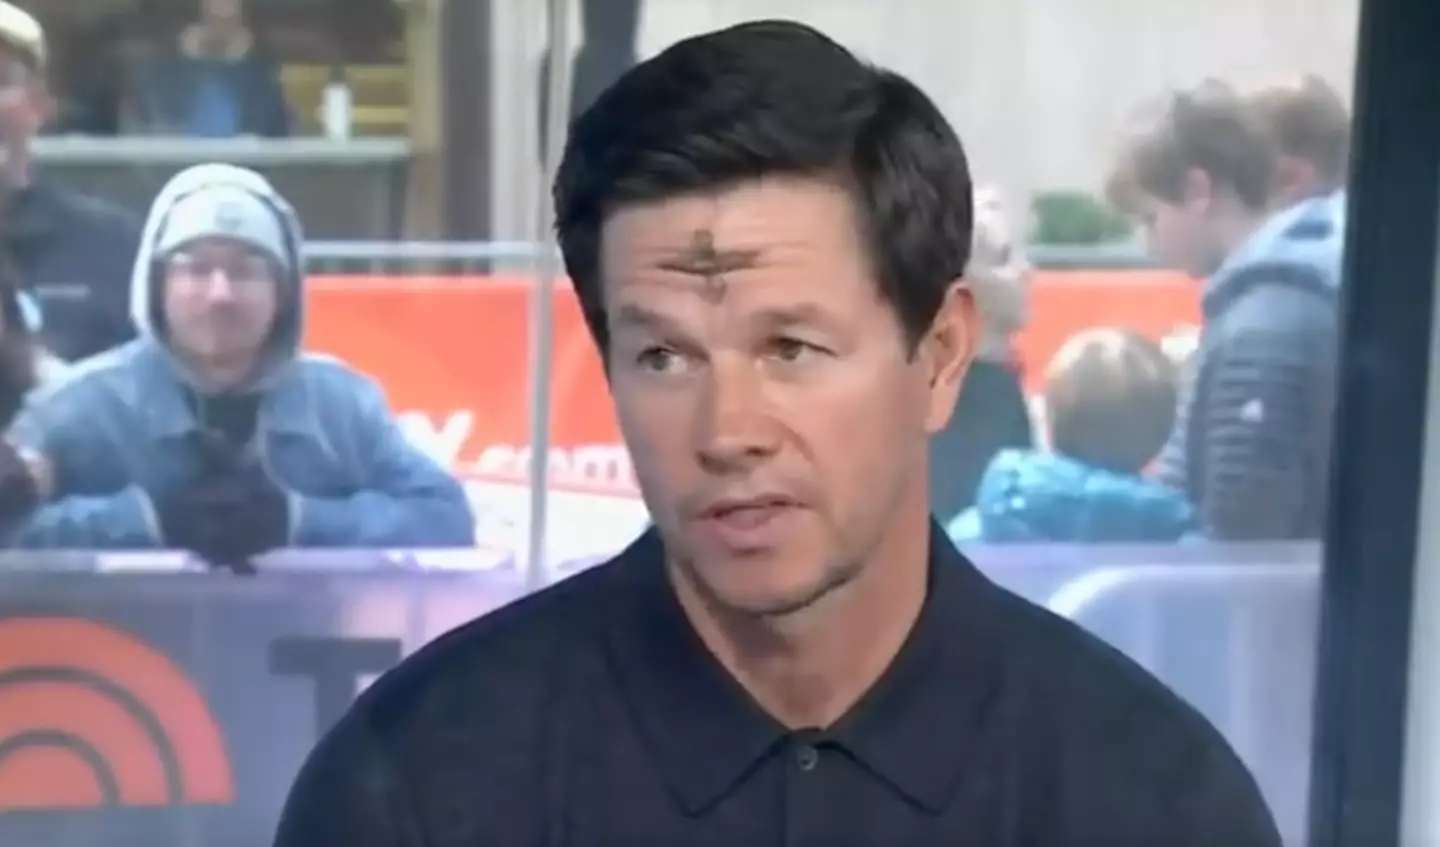 Wahlberg says he 'cannot deny' his faith despite what others may think or believe.